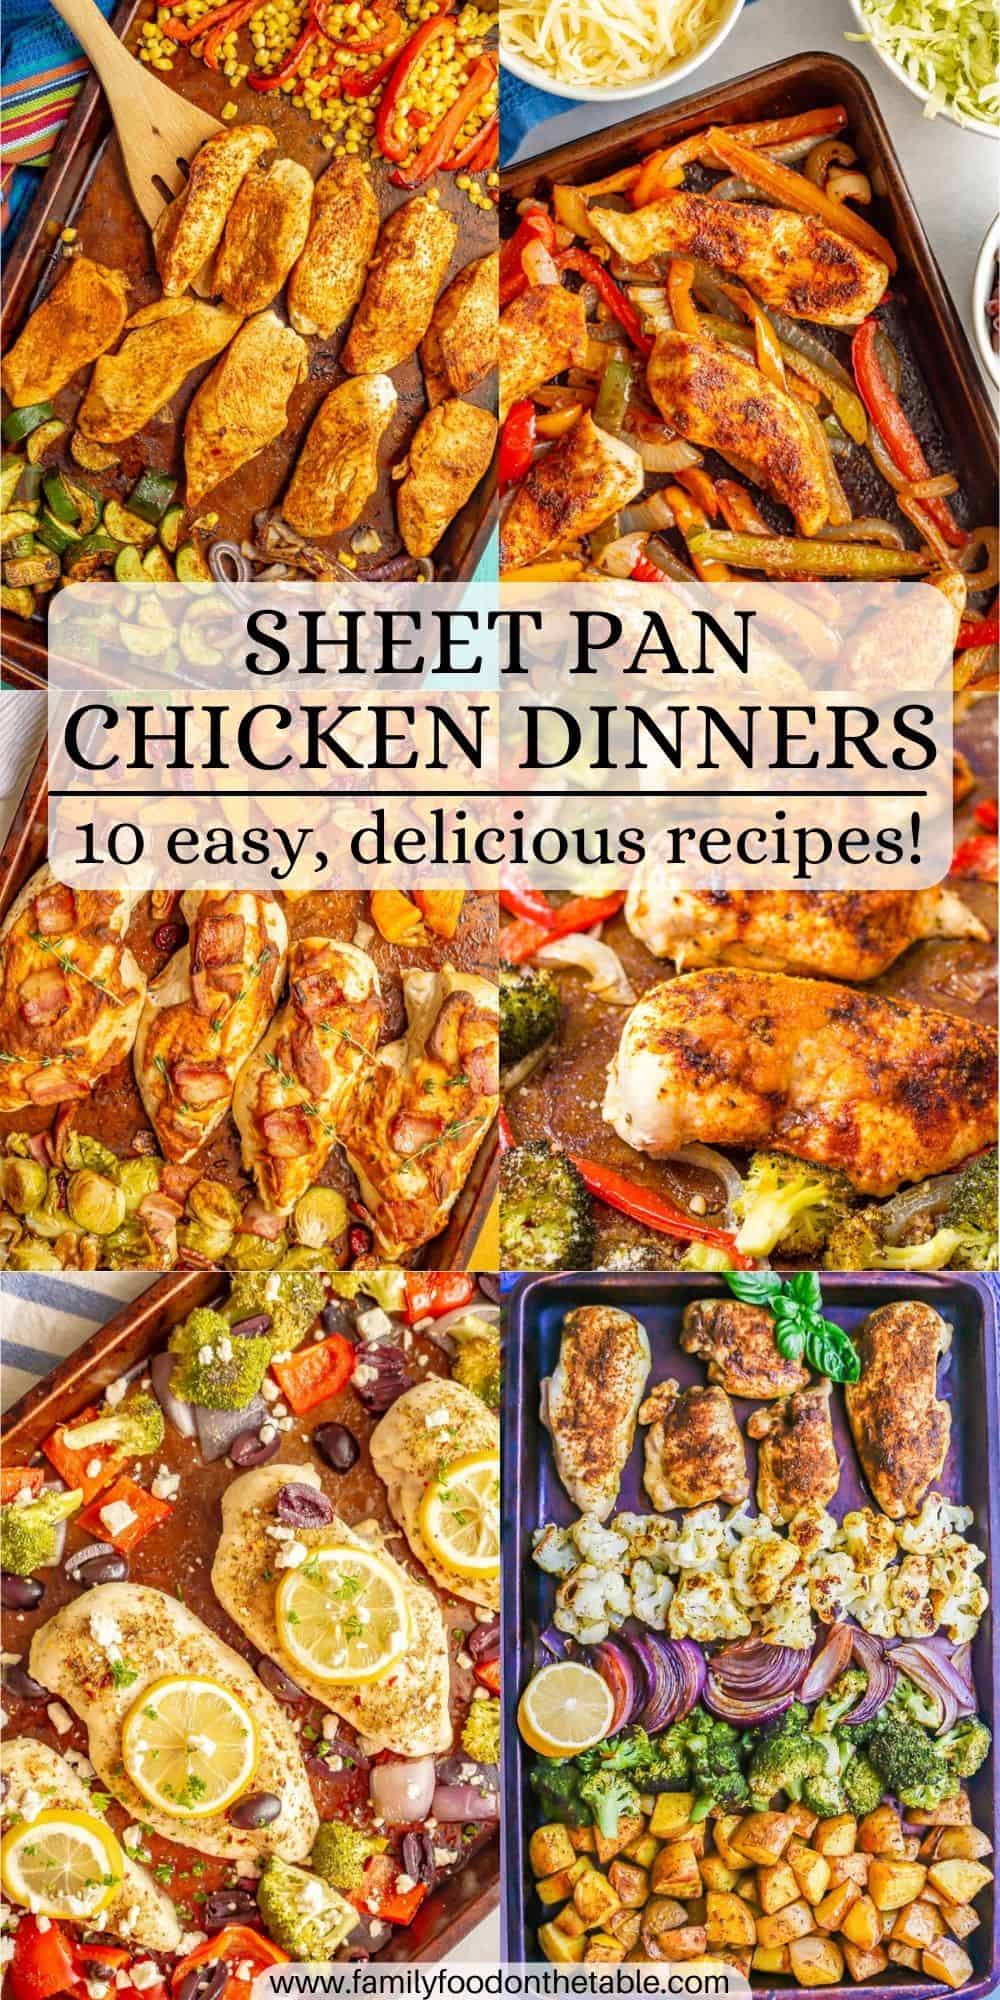 A collage of six different sheet pan chicken dinners with a text overlay in the middle